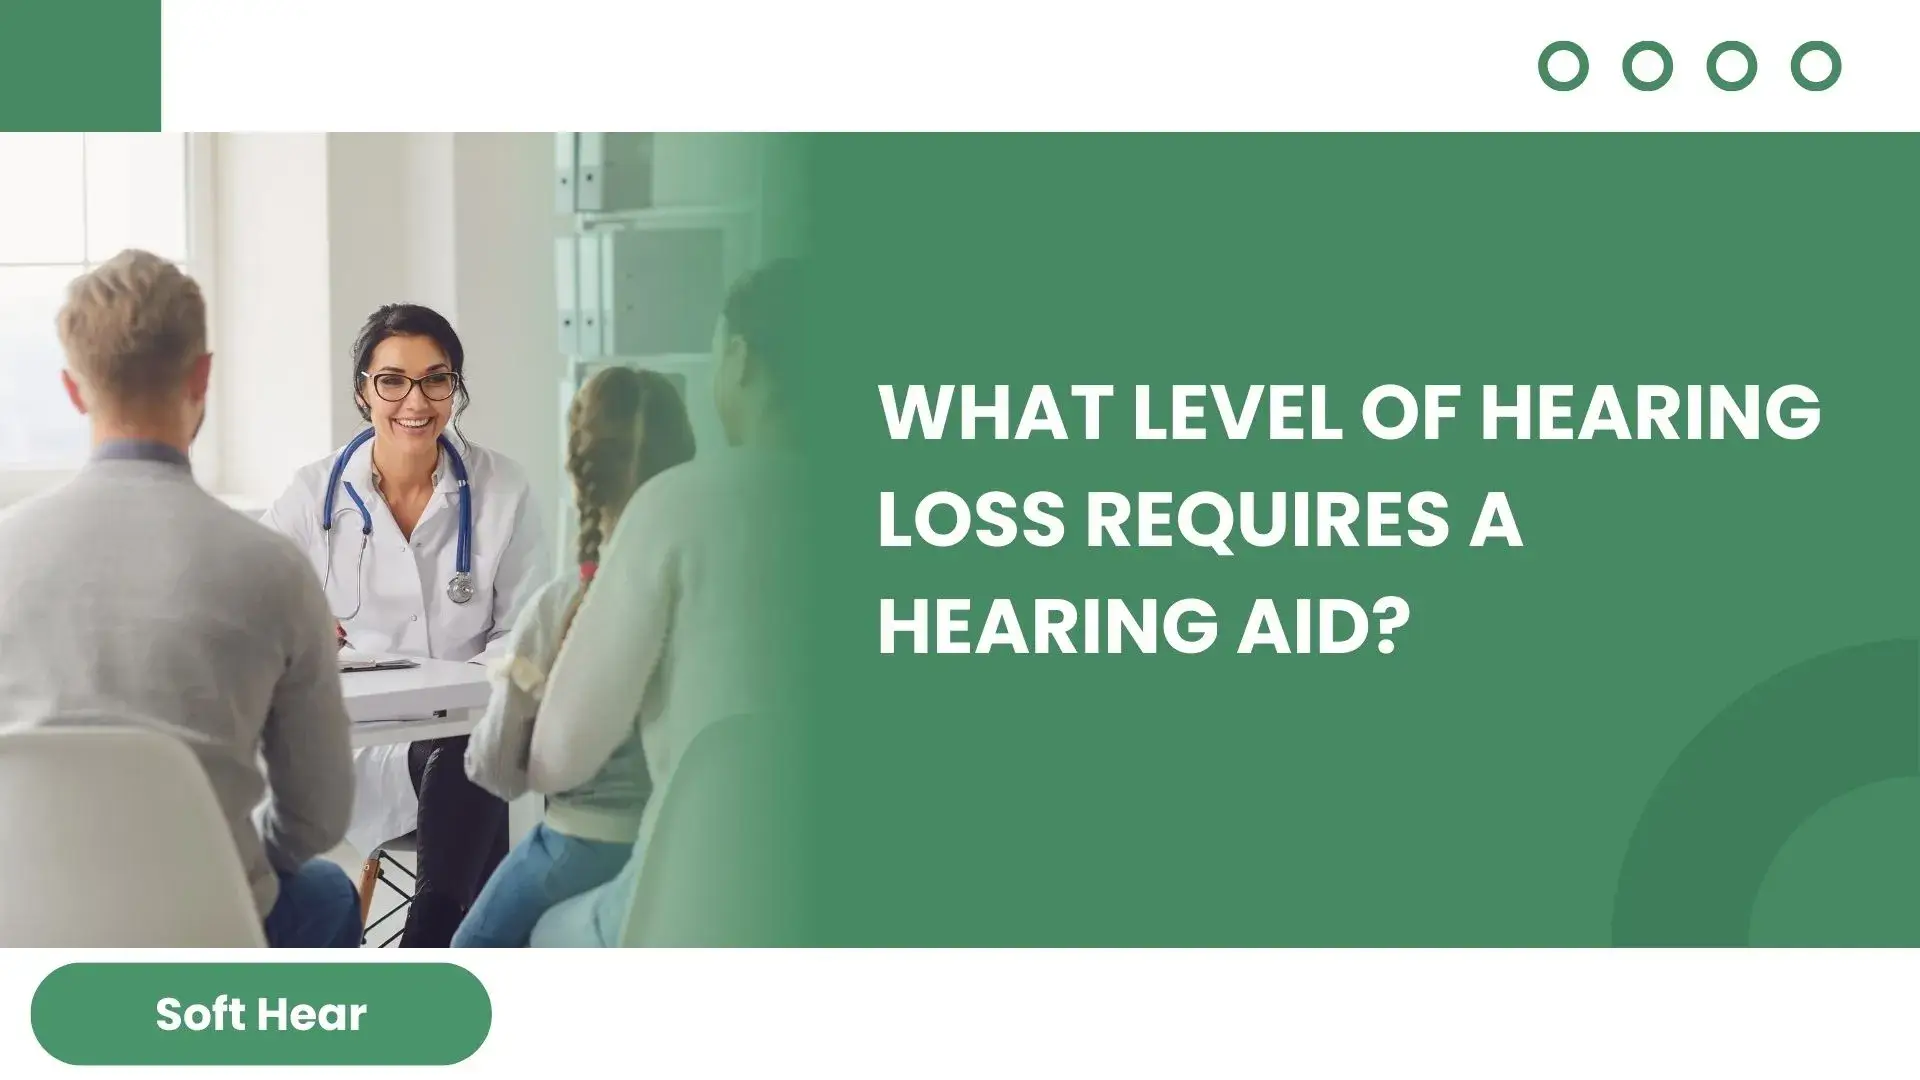 What Level of Hearing Loss Requires a Hearing Aid